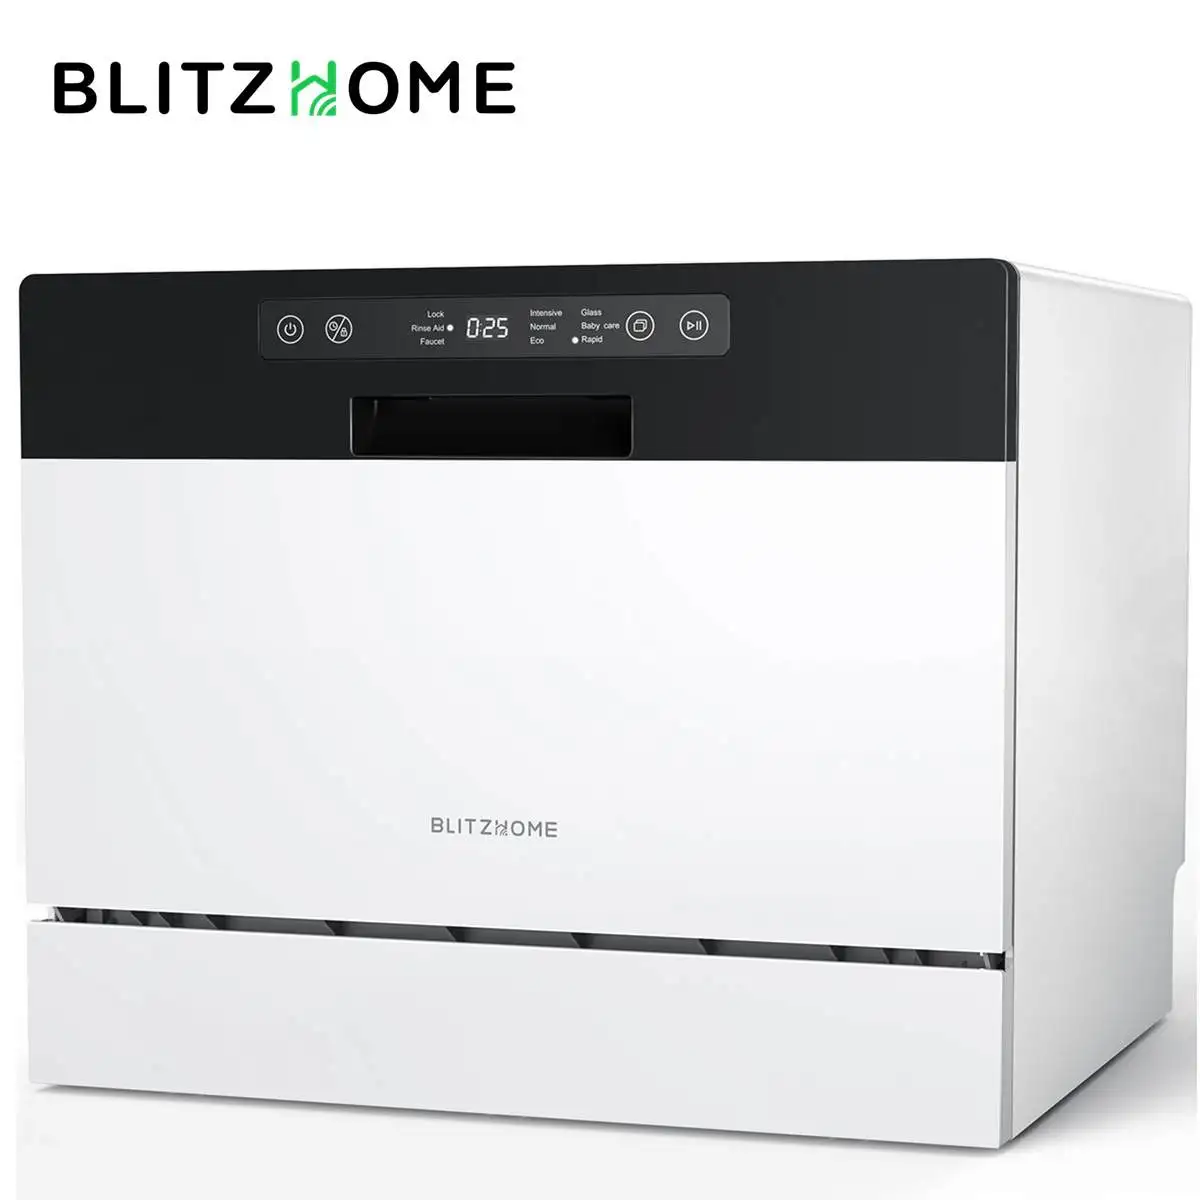 BlitzHome Portable Countertop Dishwasher 6 Place Settings with 6 Washing Programs Dryer Washing Machine For Dorm RV Apartment